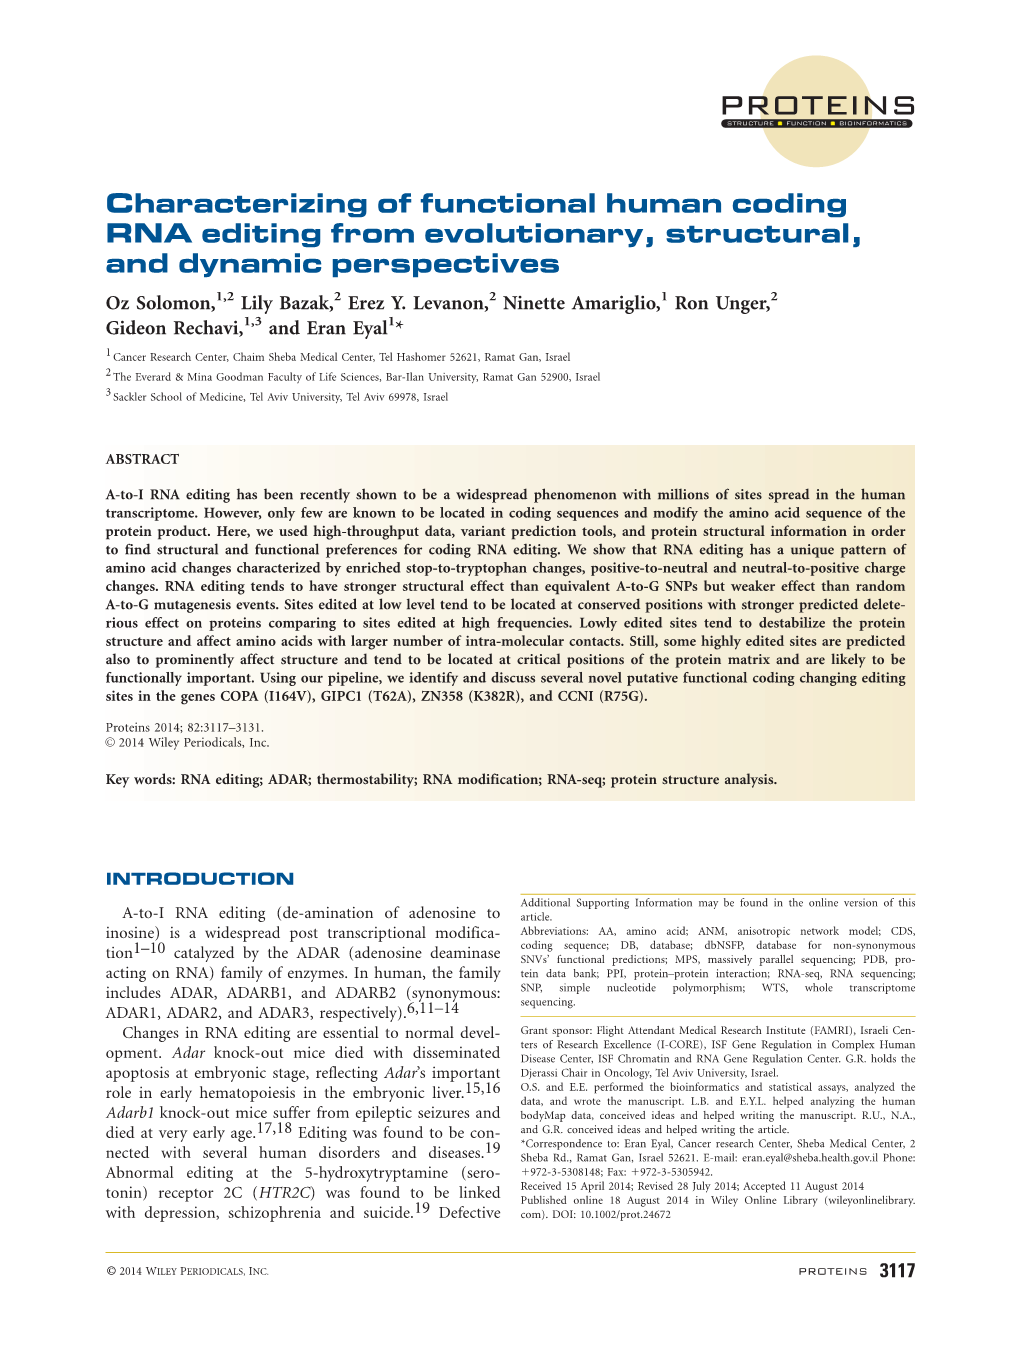 Characterizing of Functional Human Coding RNA Editing from Evolutionary, Structural, and Dynamic Perspectives Oz Solomon,1,2 Lily Bazak,2 Erez Y